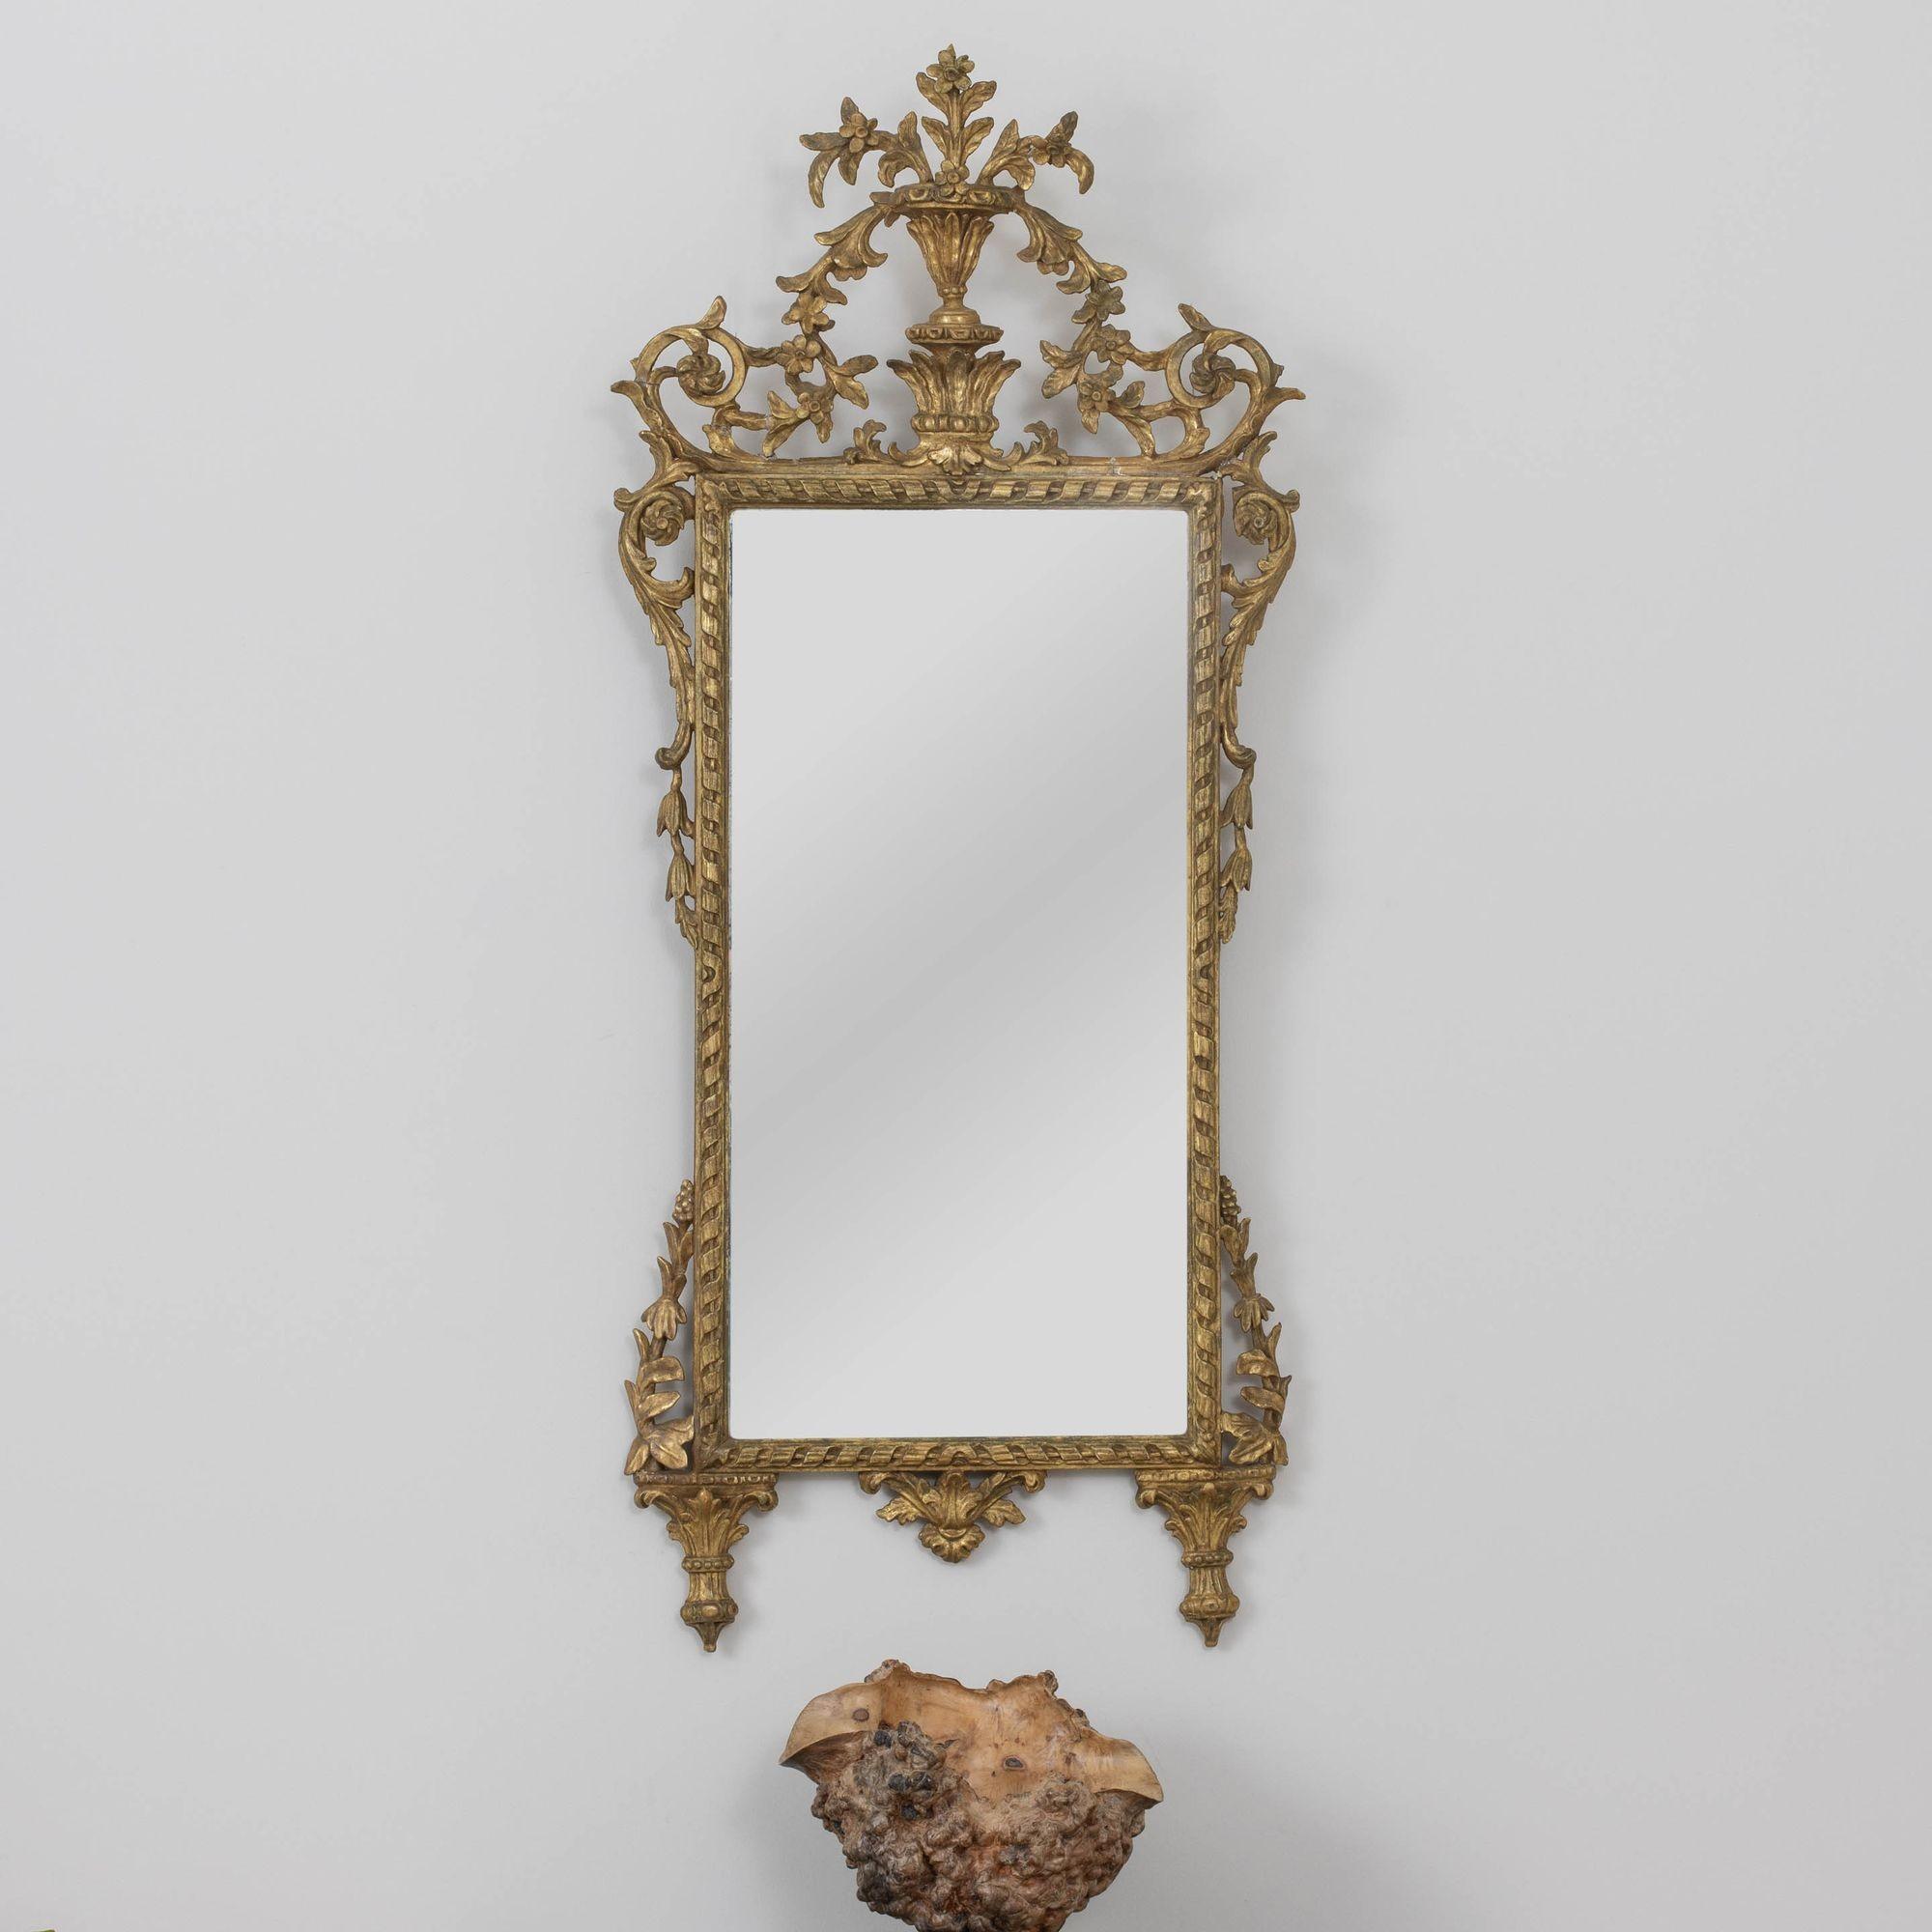 An elegant, Italian mirror, finely carved with beautifully aged original giltwood and original mirror plate. Carved urn pediment with floral and leaf motif.